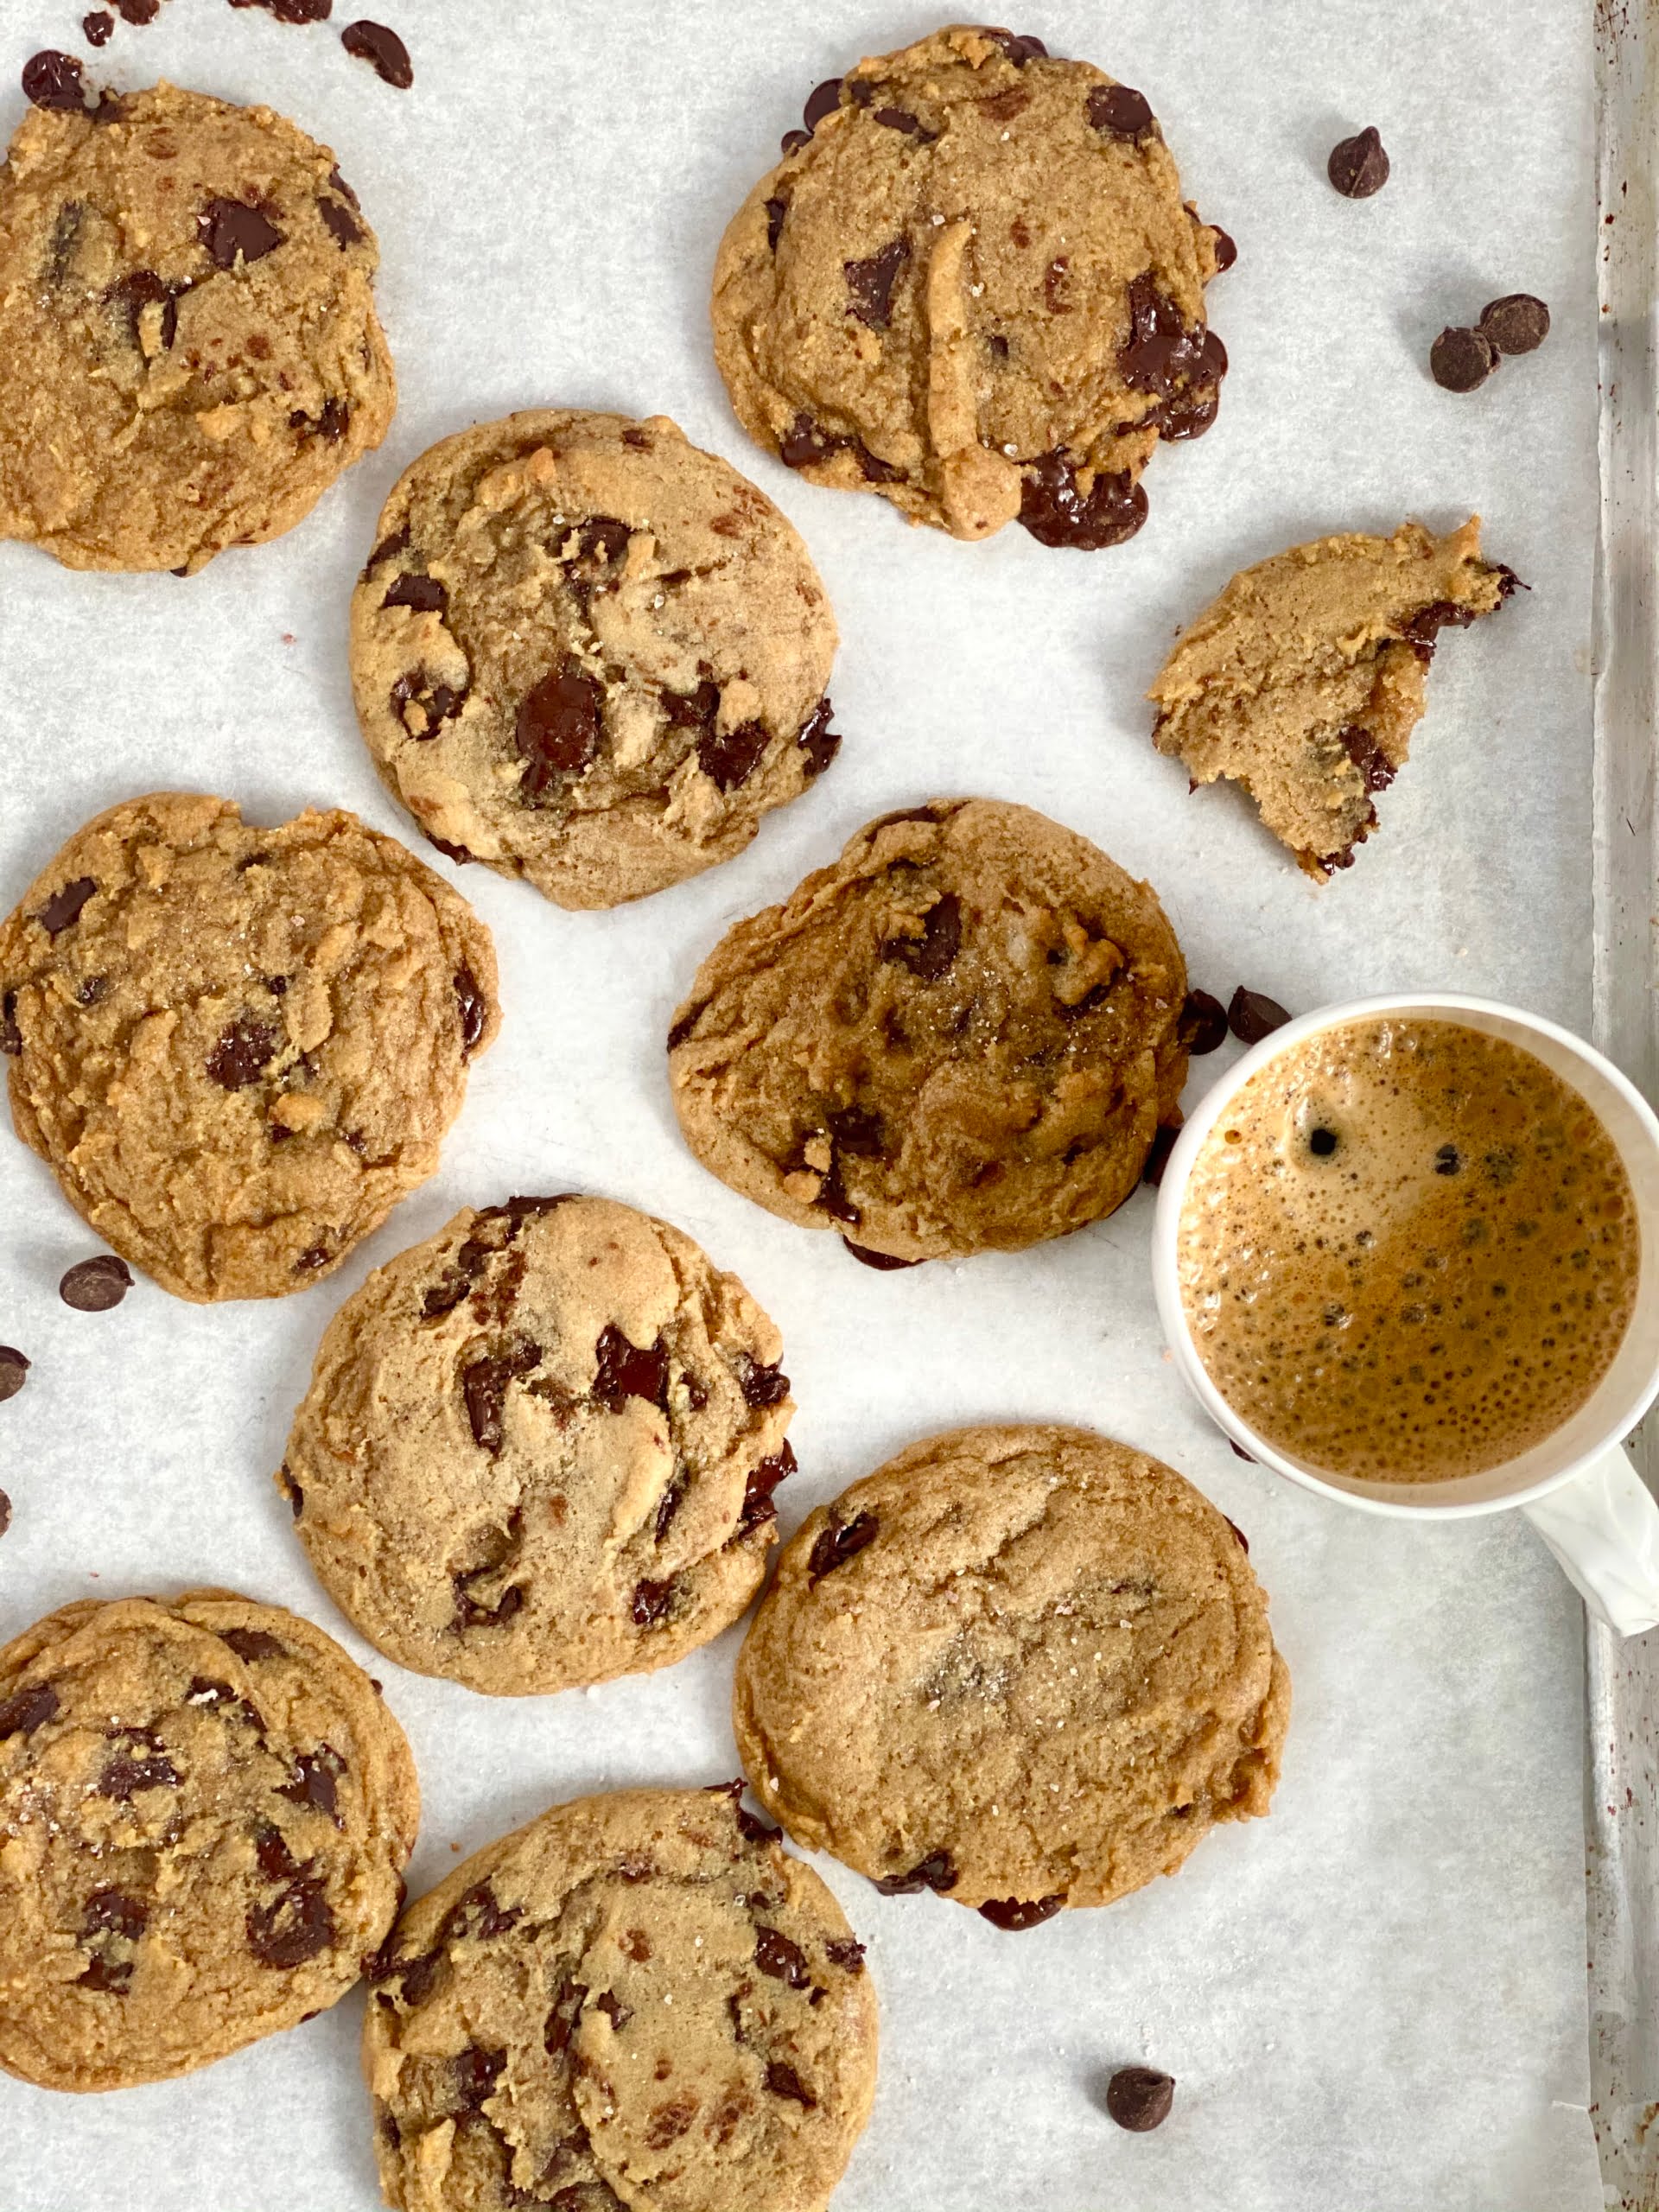 Vegan Chocolate Chip Cookies on a baking tray with a cup of coffee - Pure Maple